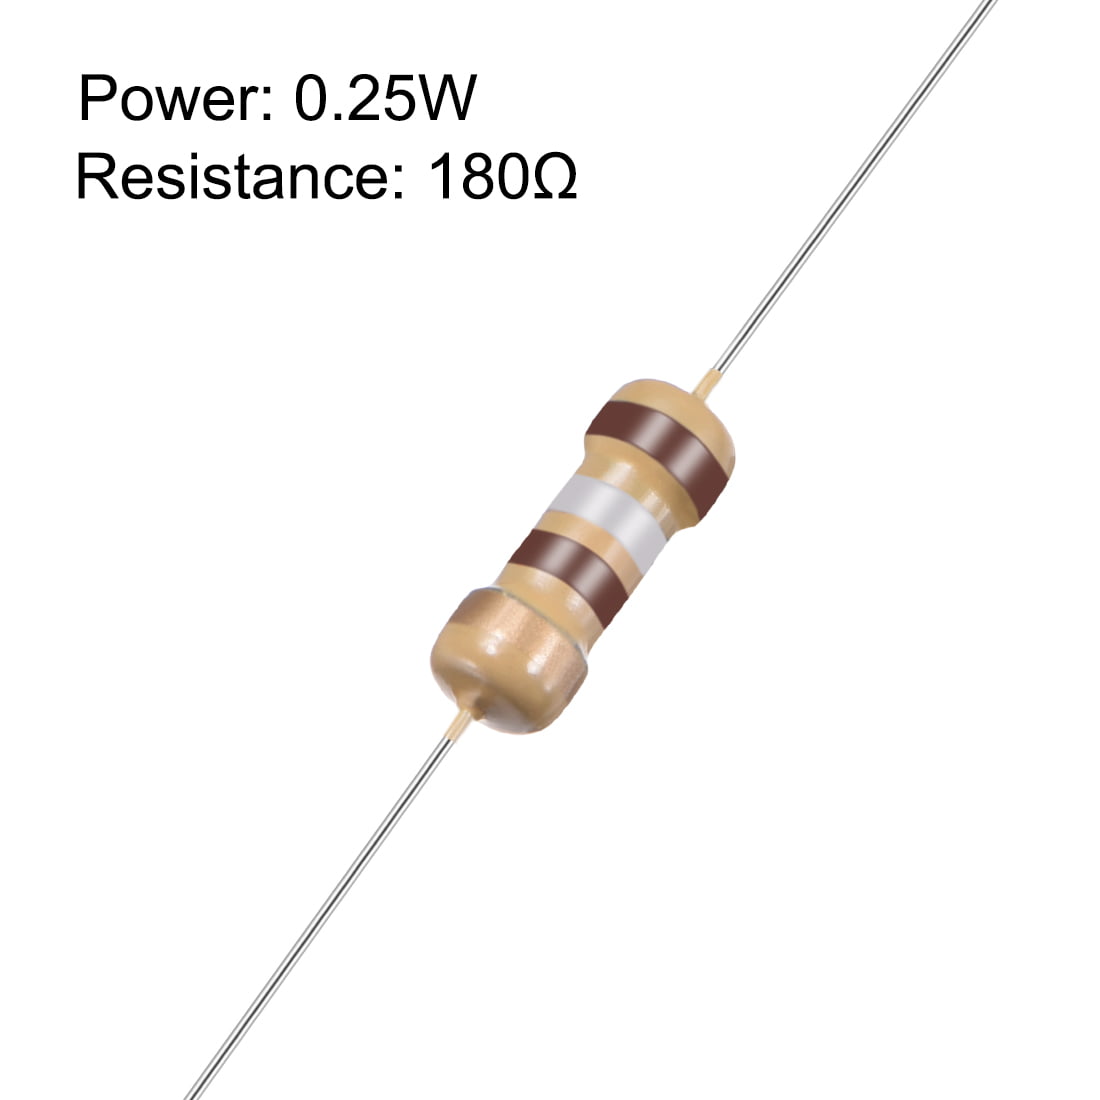 4 Bands for DIY Electronic Projects and Experiments Axial Lead uxcell 500Pcs 180 Ohm Resistor 1/4W 5% Tolerance Carbon Film Resistors